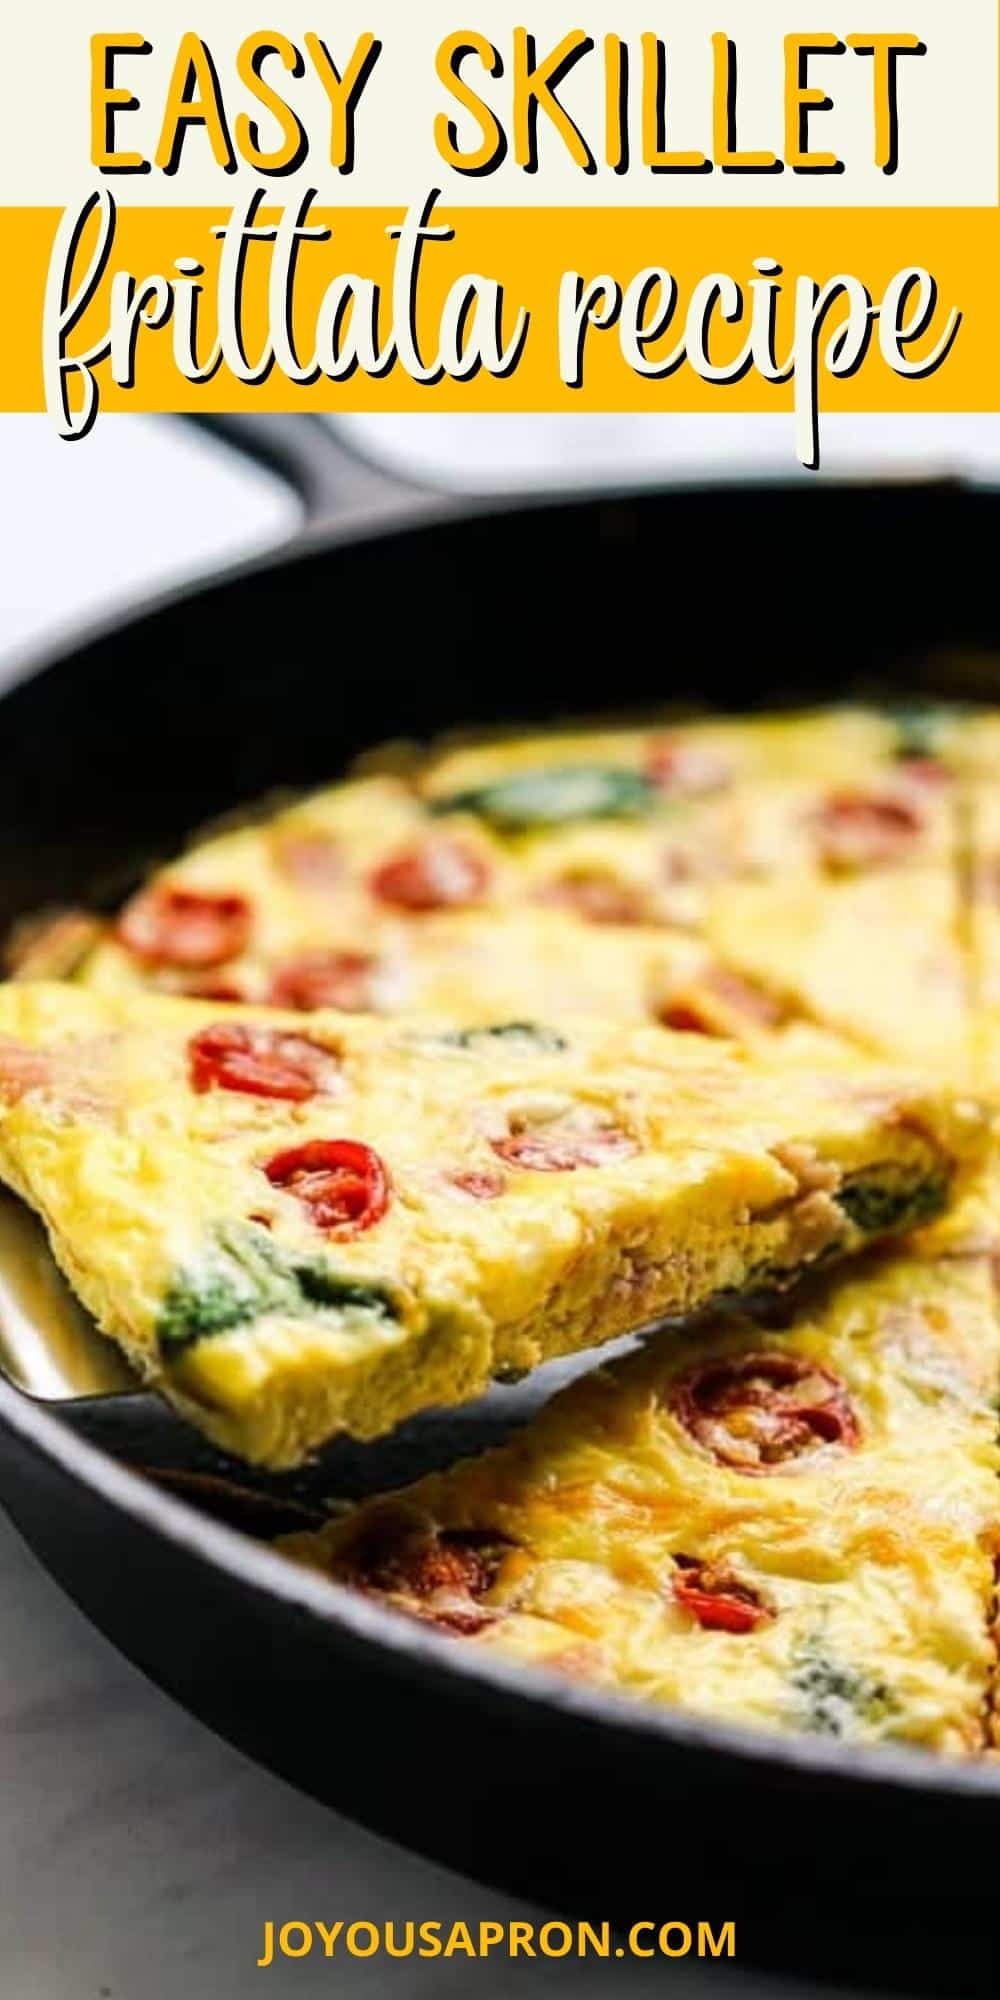 Easy Frittata Recipe - learn how to make egg frittata! Healthy, easy and delicious breakfast and brunch recipe made on a skillet, loaded with spinach, ham and tomatoes. via @joyousapron